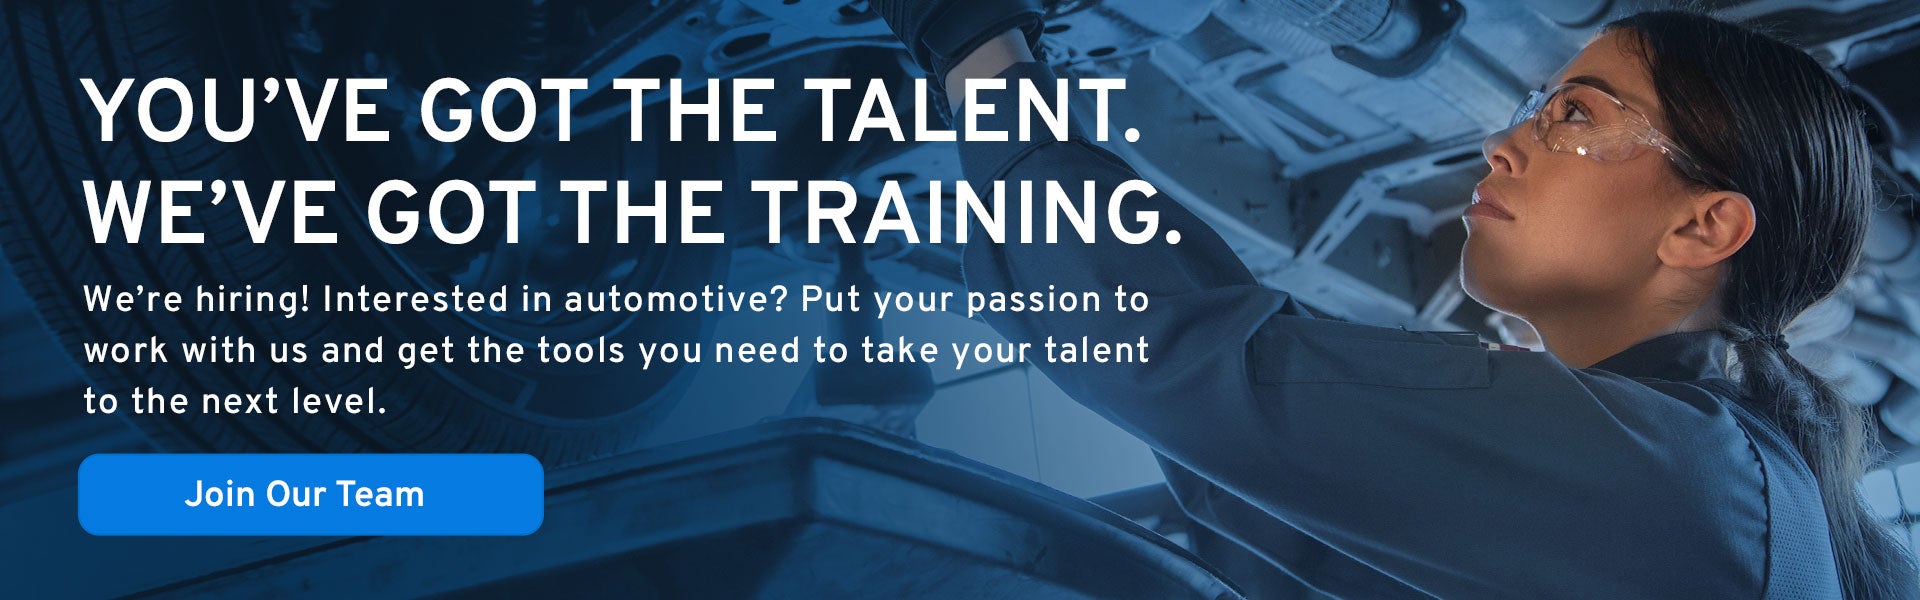 You've got the talend. We've got the training.